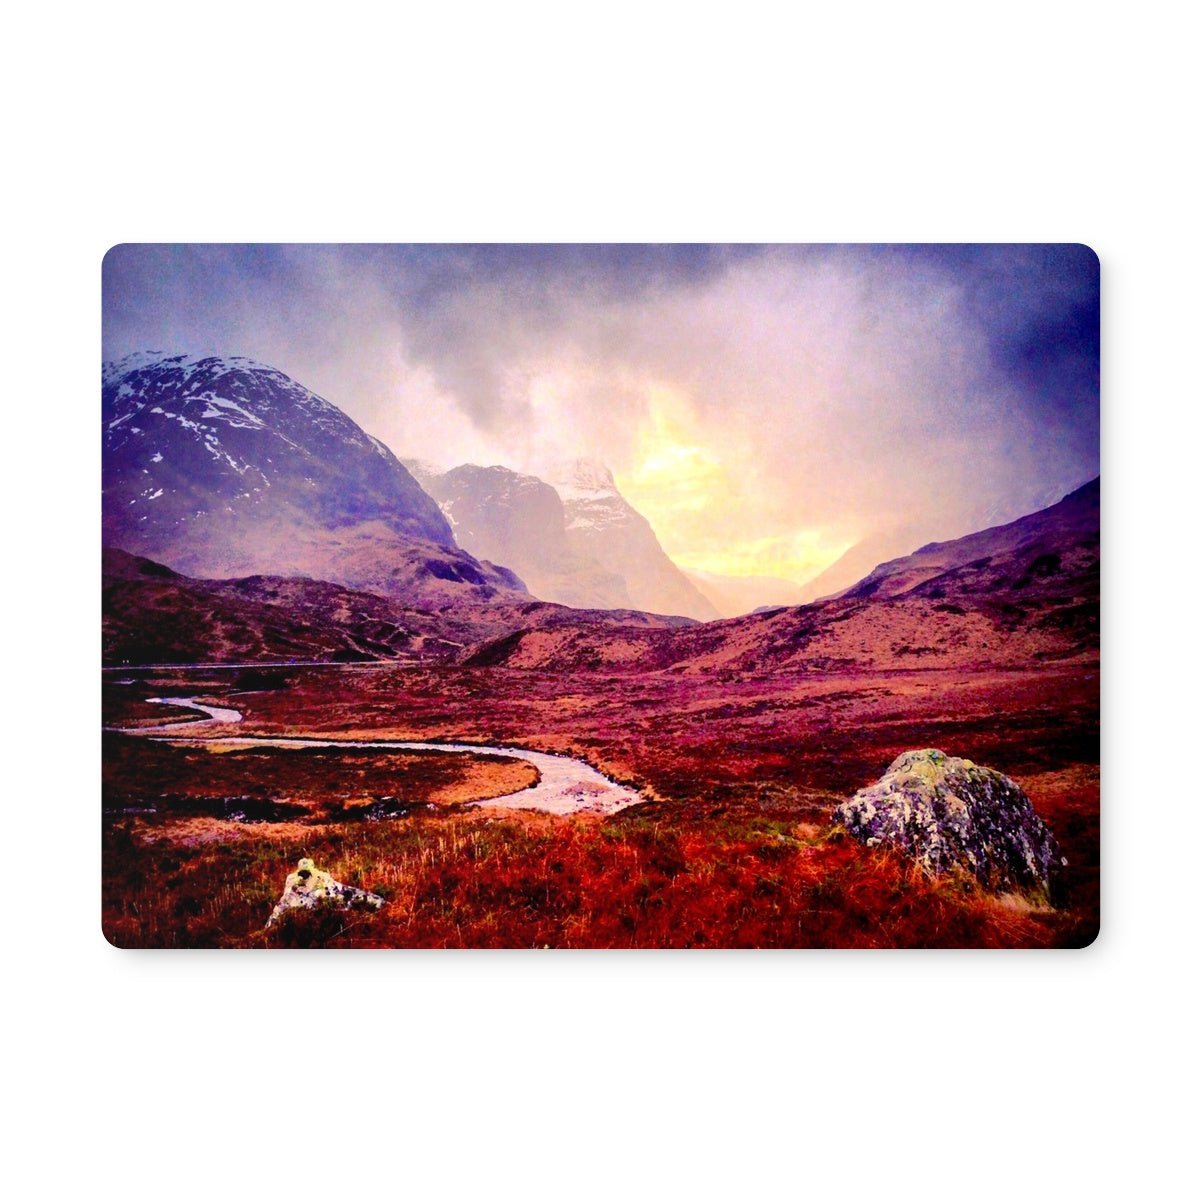 A Brooding Glencoe Art Gifts Placemat-Placemats-Glencoe Art Gallery-2 Placemats-Paintings, Prints, Homeware, Art Gifts From Scotland By Scottish Artist Kevin Hunter